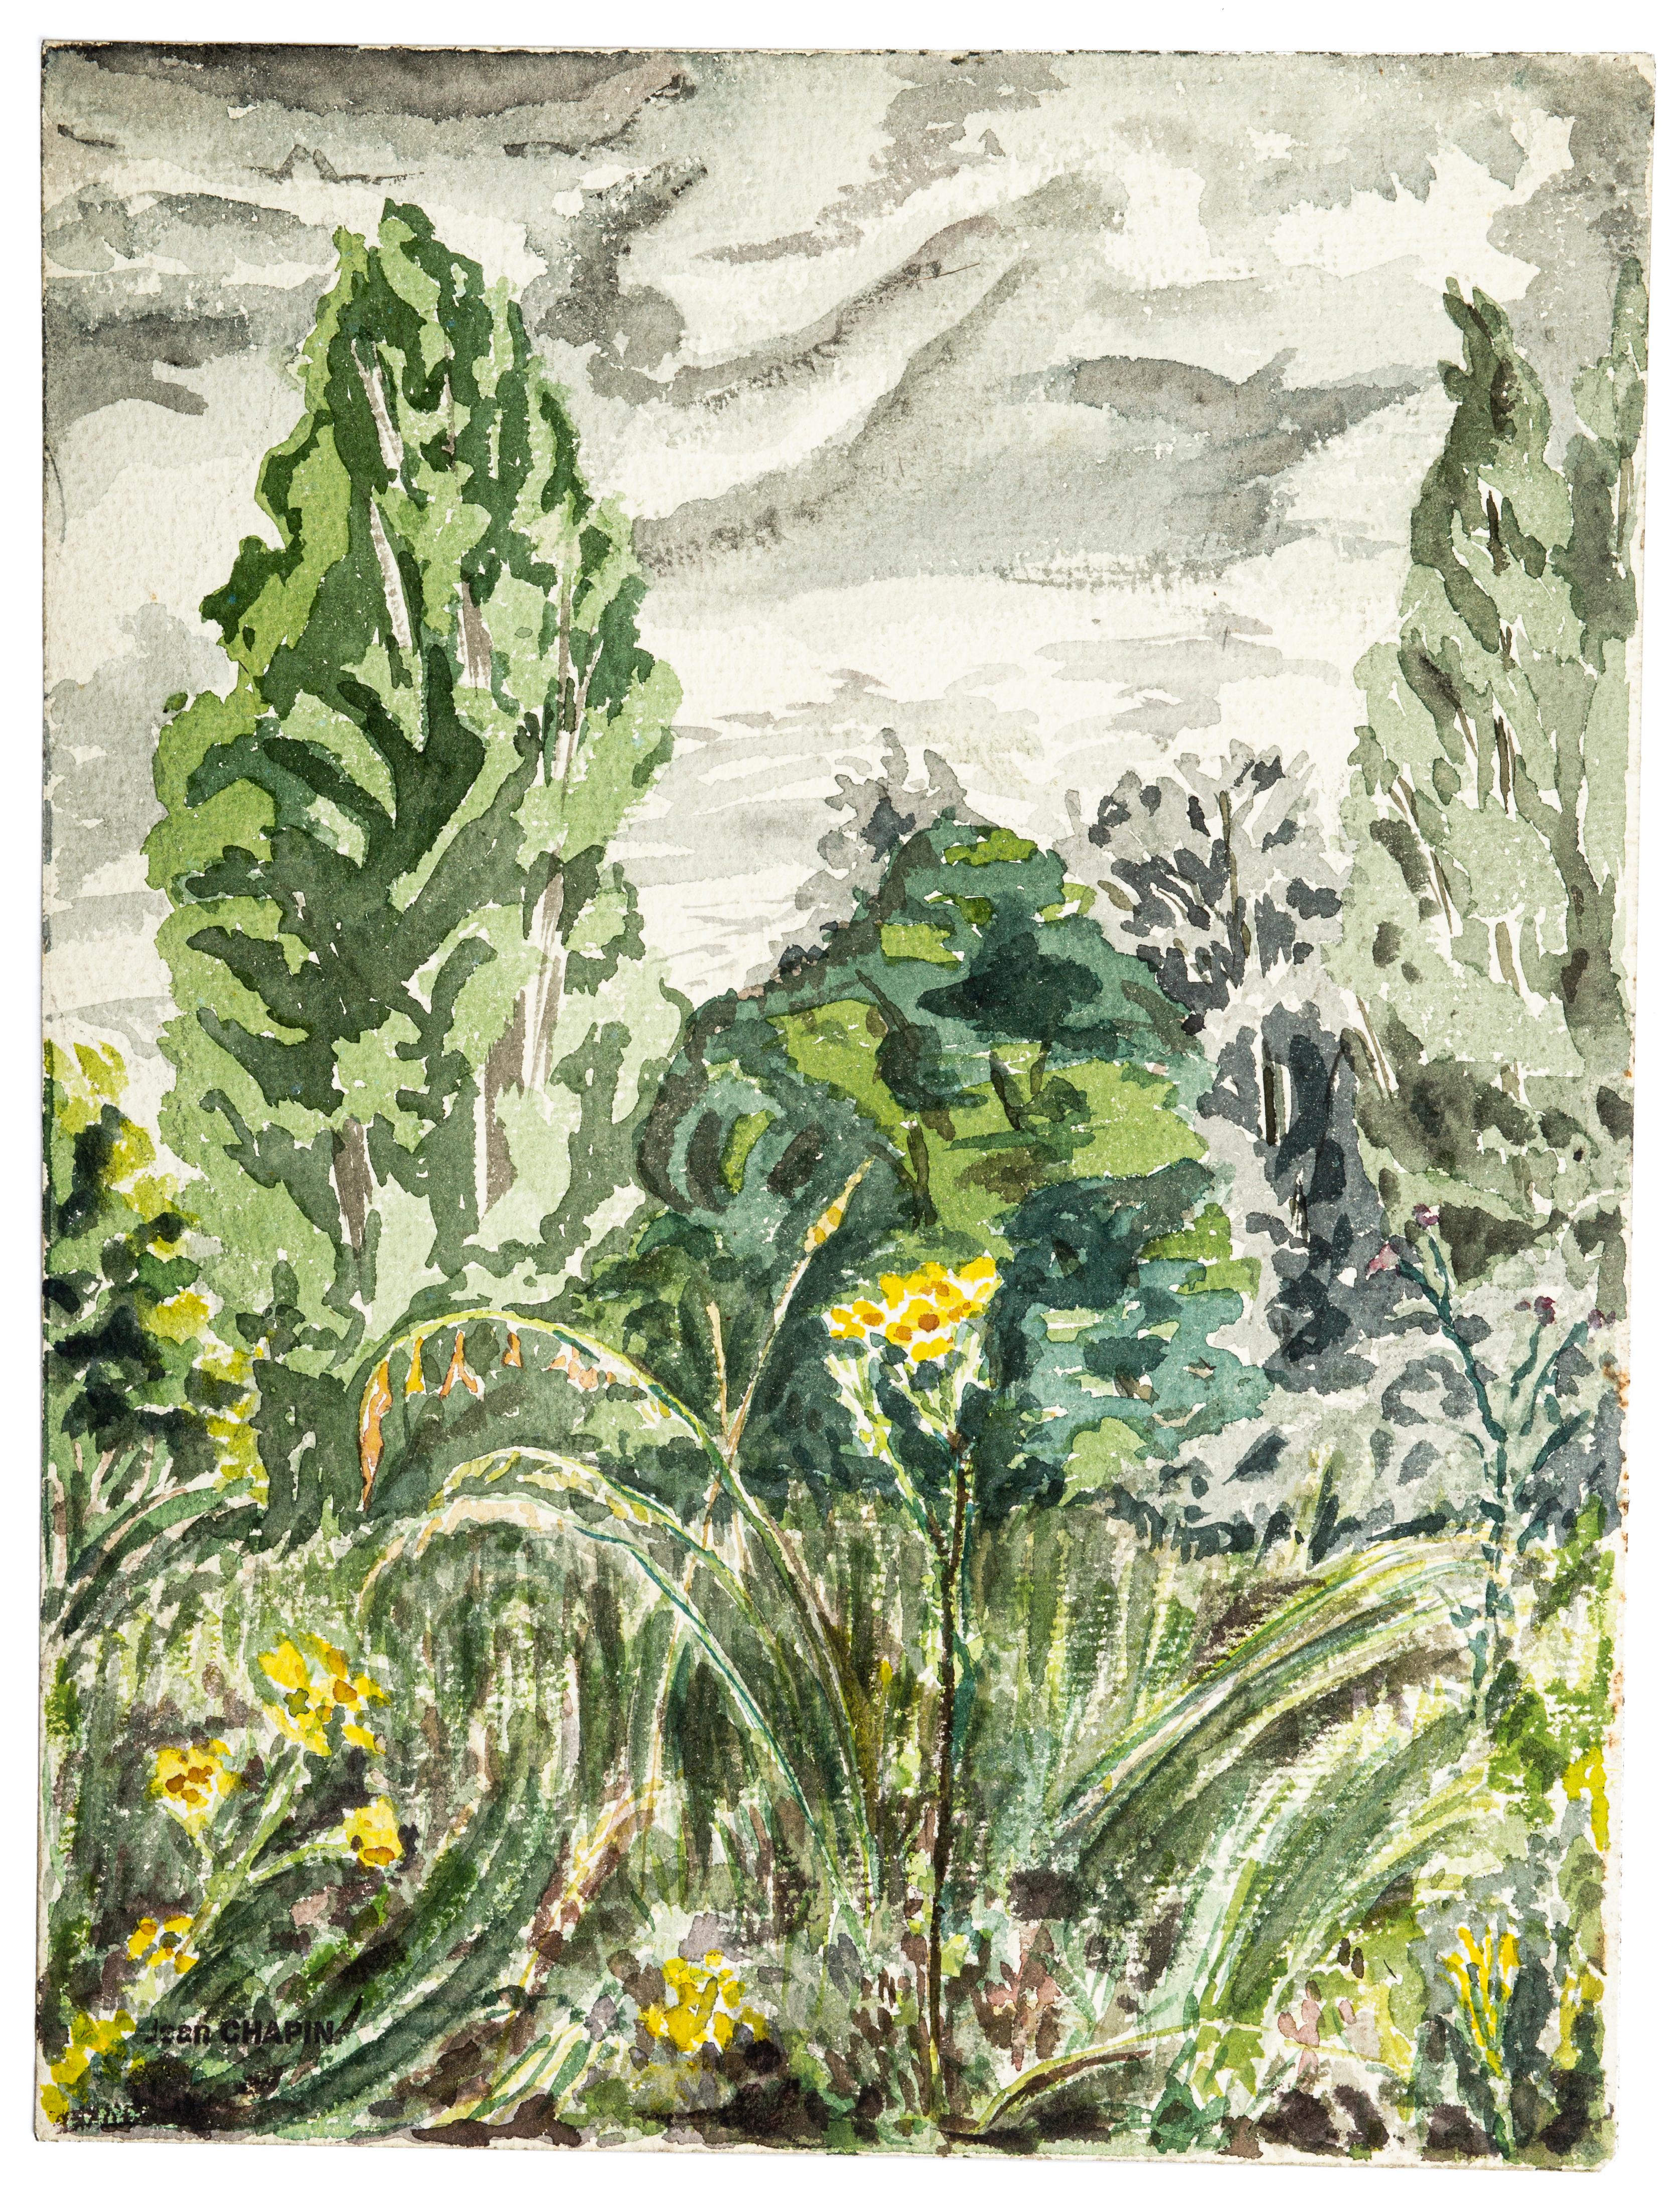 Green Landscape is a watercolor drawing realized by Jean Chapin in the 1920s.

Signature stamp of the artist on the lower left margin

The artwork represents a beautiful landscape.

Good conditions.

Jean Chapin (Paris, 1896 - 1994), a French artist